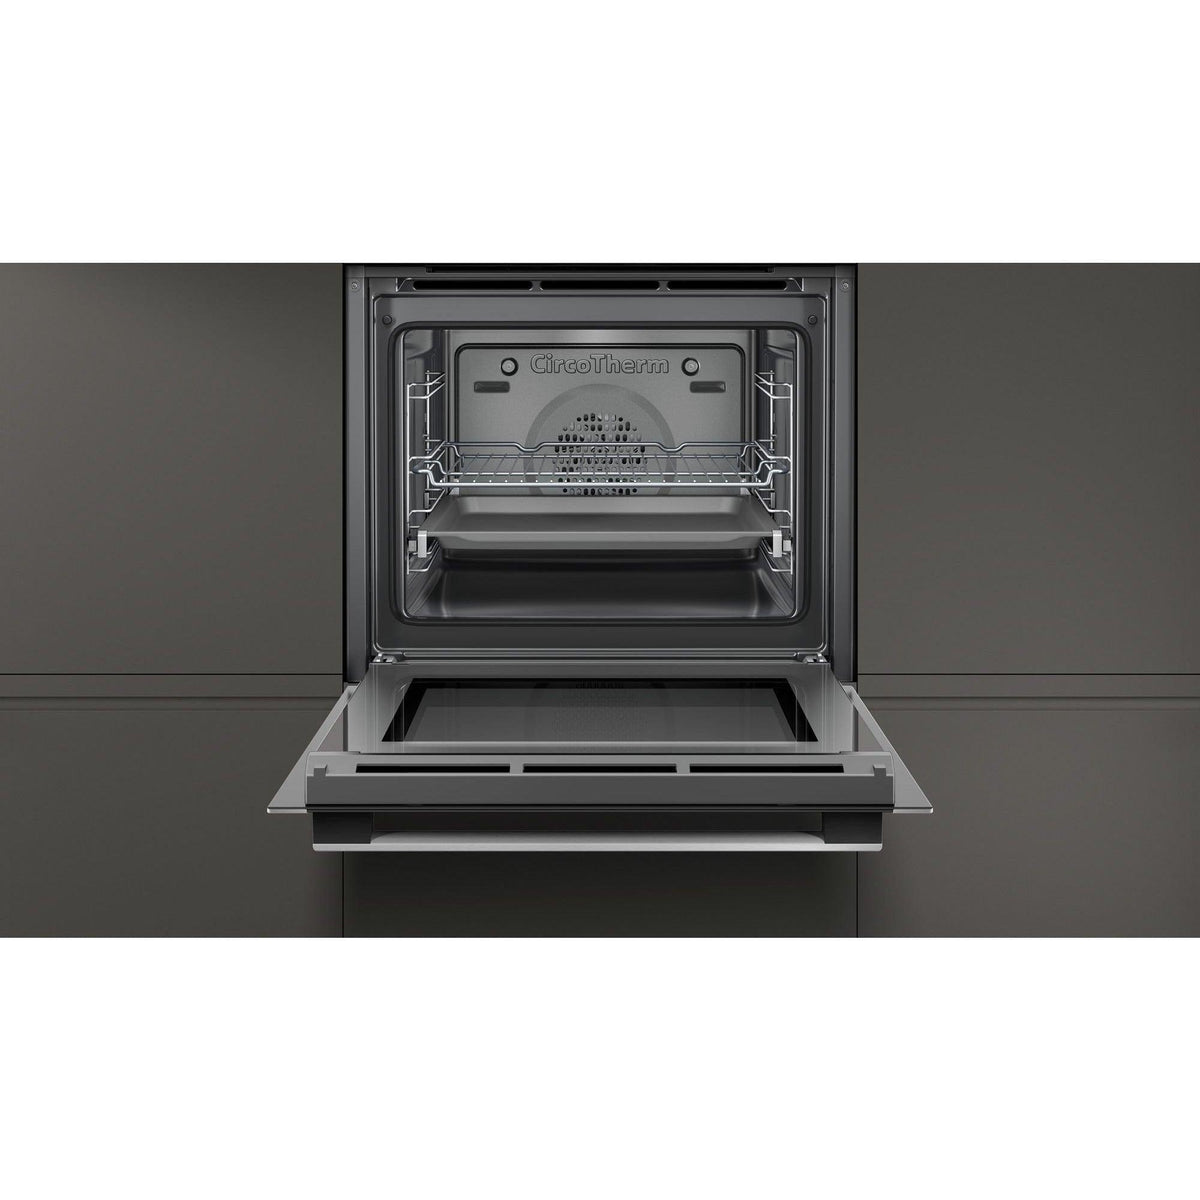 Neff N50 Built-In Electric Single Oven - Stainless Steel | B1ACE4HN0B from DID Electrical - guaranteed Irish, guaranteed quality service. (6890781671612)